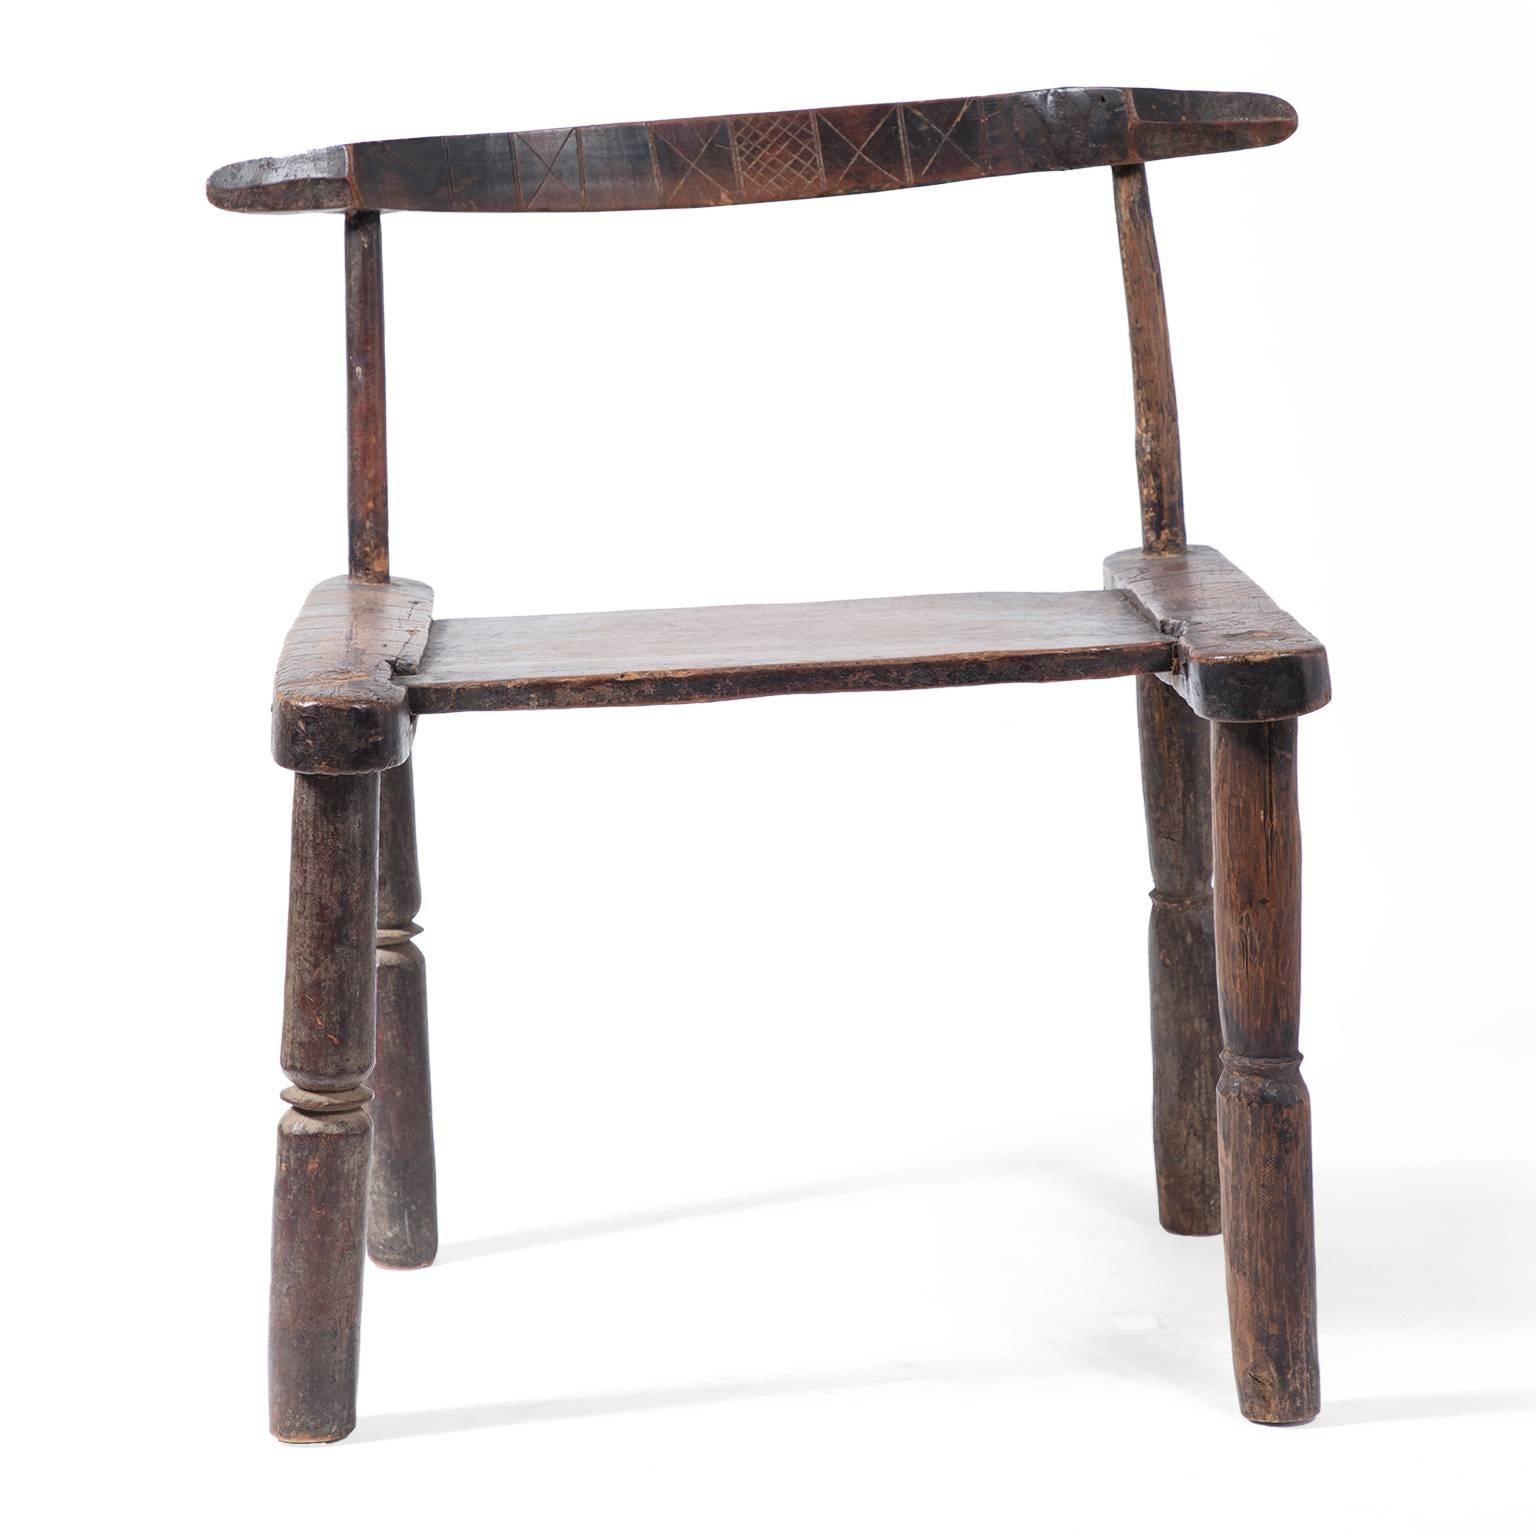 In West African tribes—such as the Dan, Senufo and Baule—chiefs and families have used low wooden chairs for centuries. A talented woodworker hand-carved the chair’s curved backrest, sculpted legs, flat seat and lateral struts. Incised marks on the